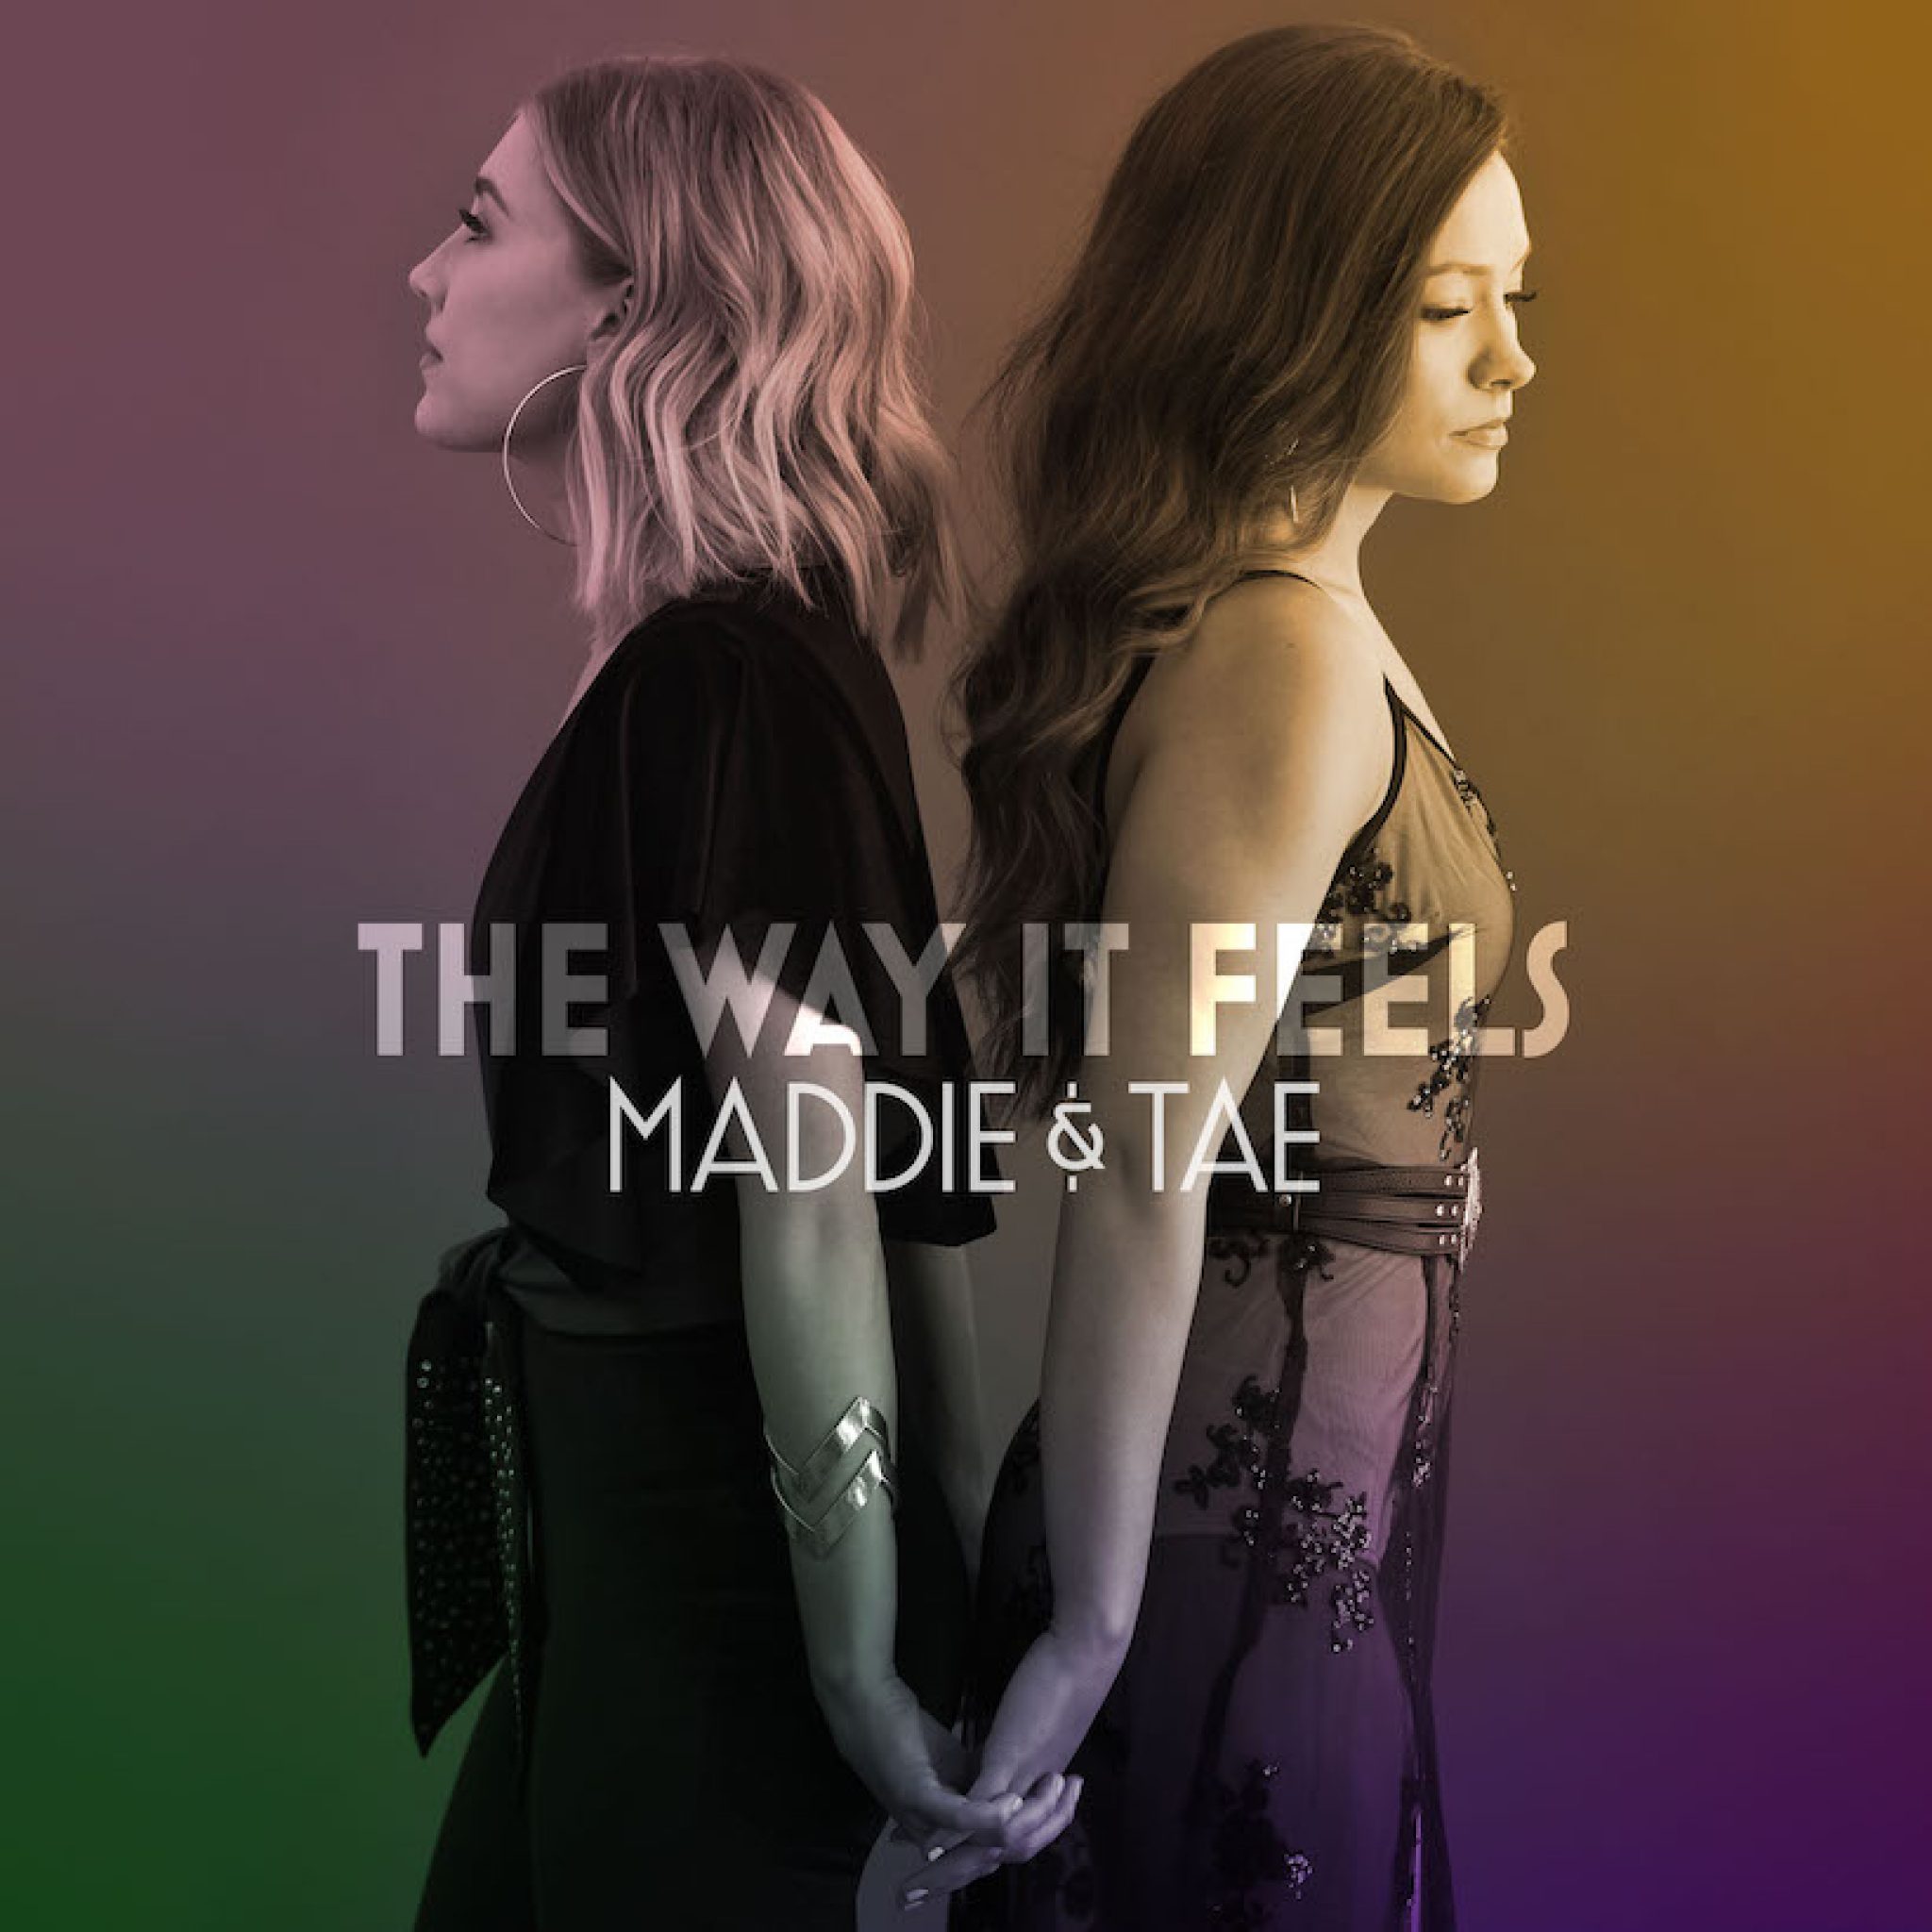 Maddie & Tae's Second Album 'The Way It Feels' Hailed As “Glorious”